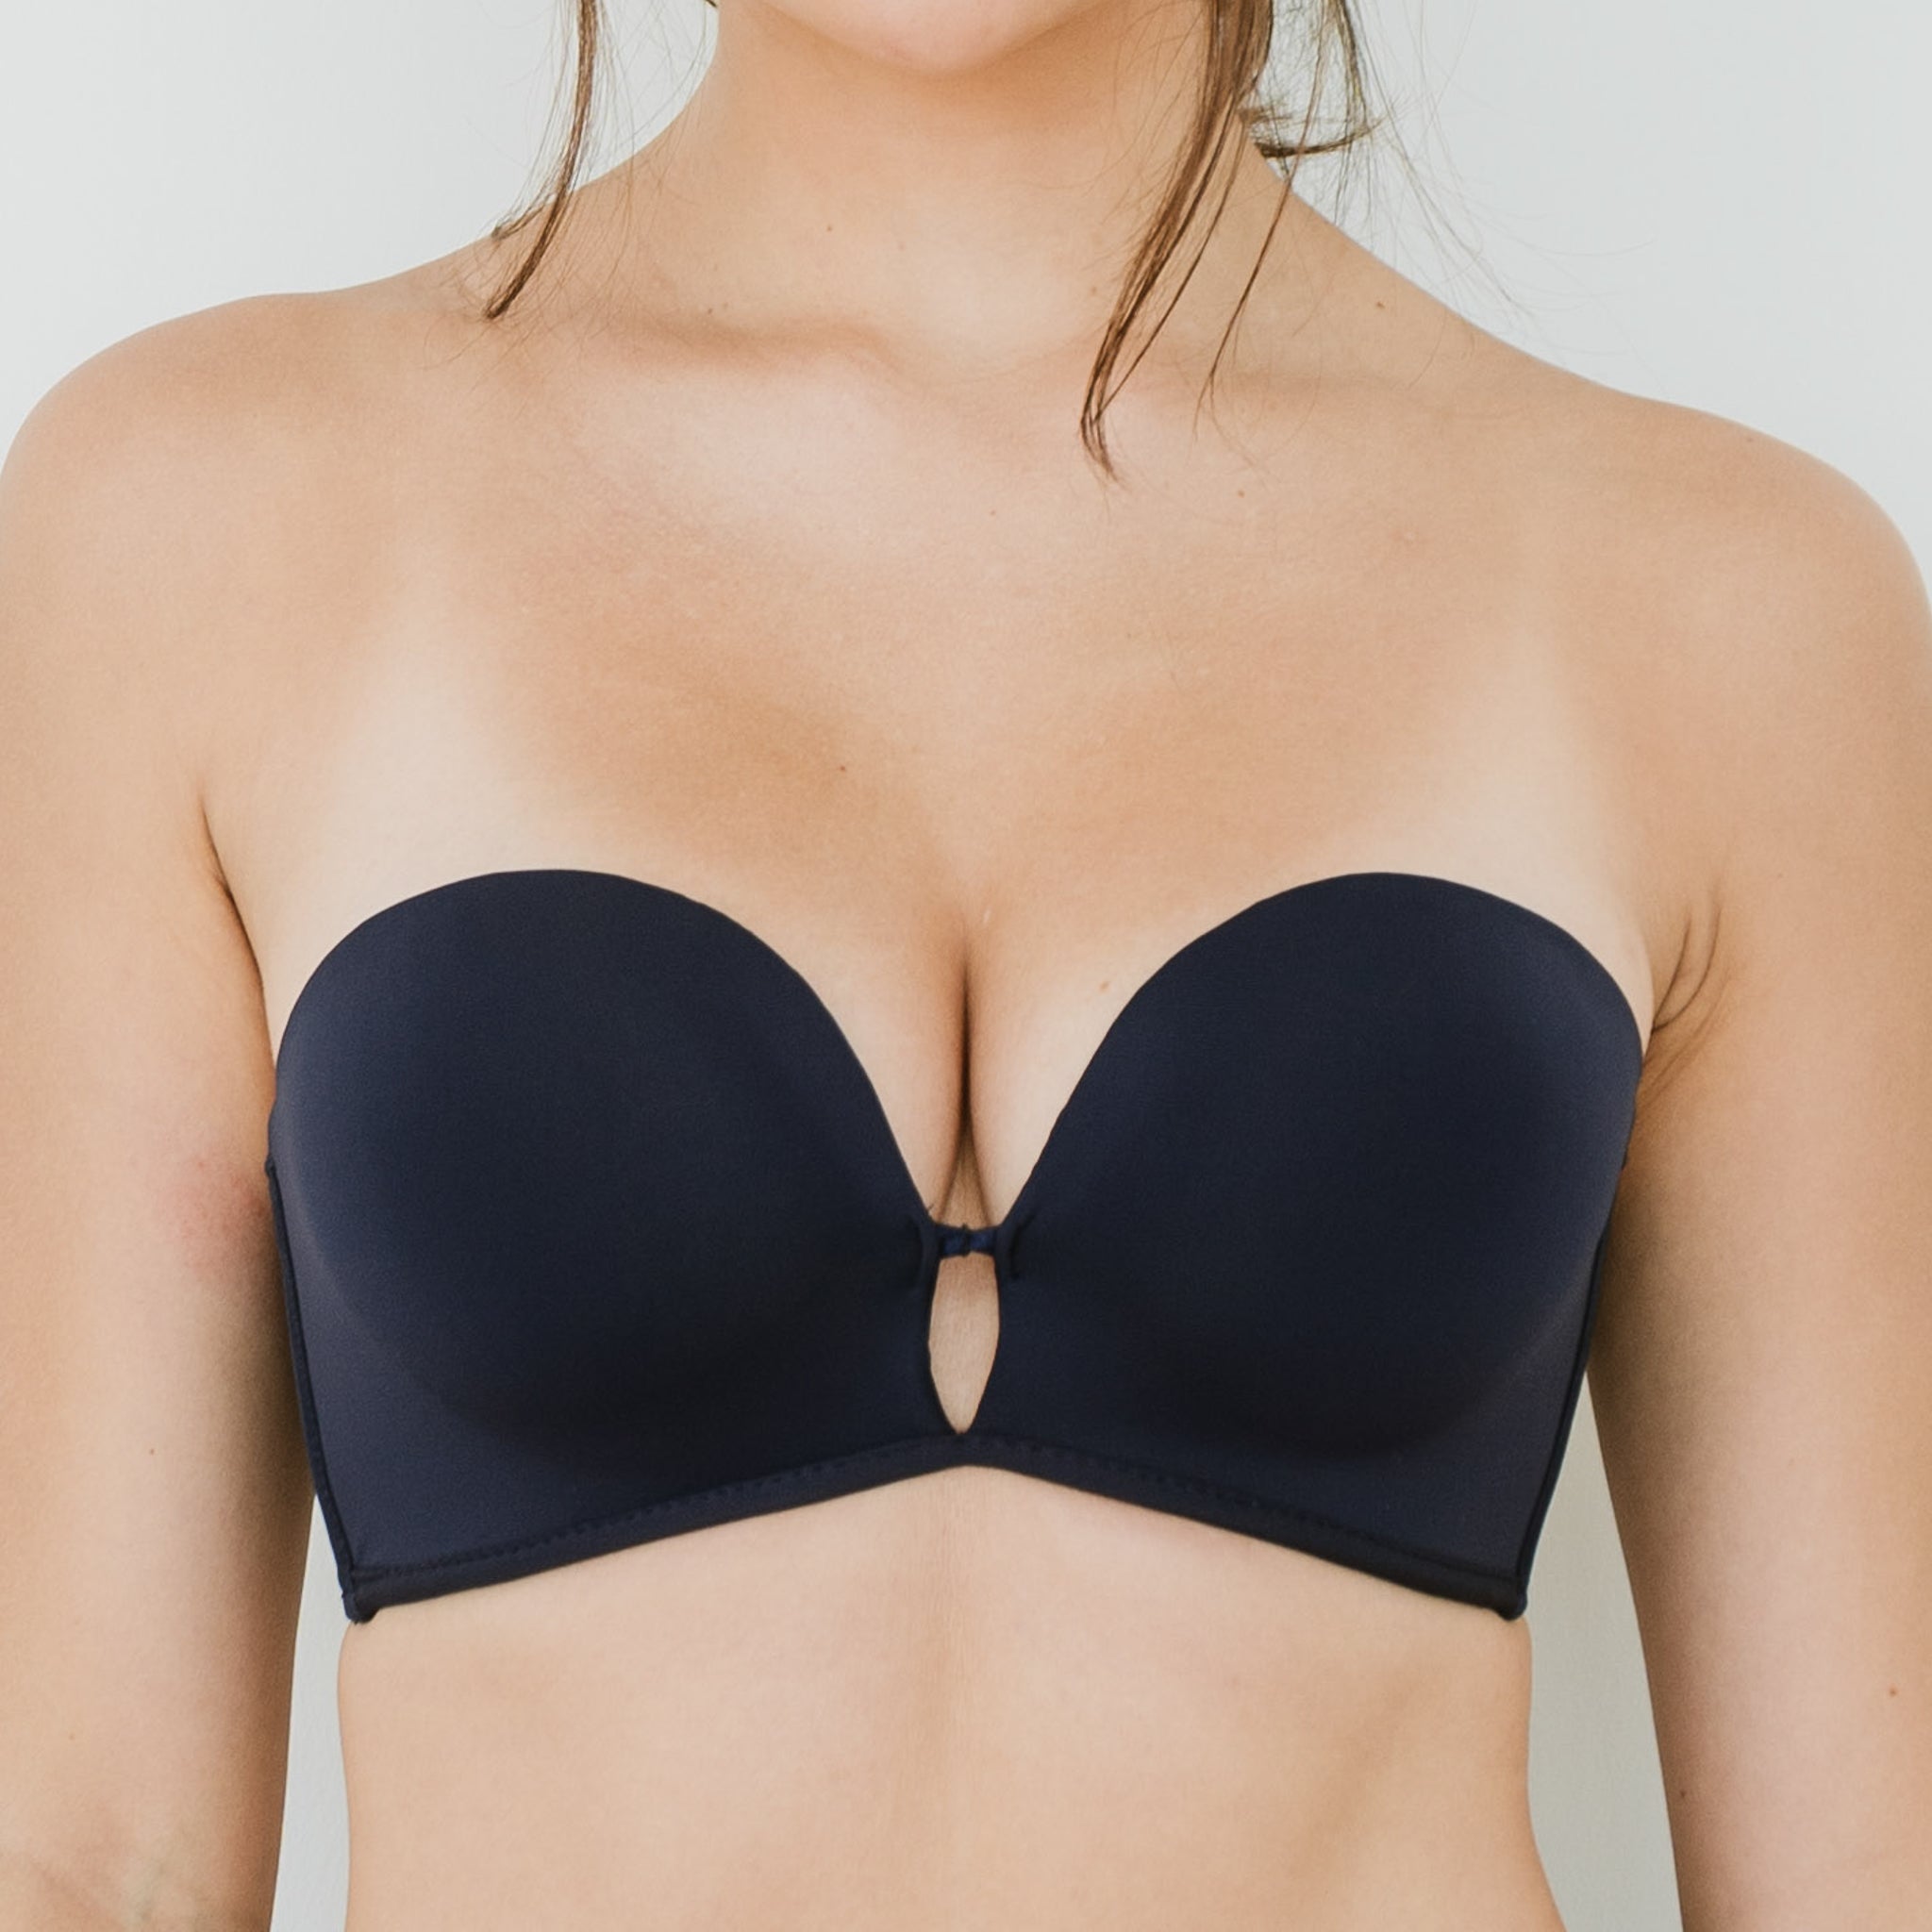 Midnightdivas - The Ultimate Strapless Bra <3 Say good riddance to